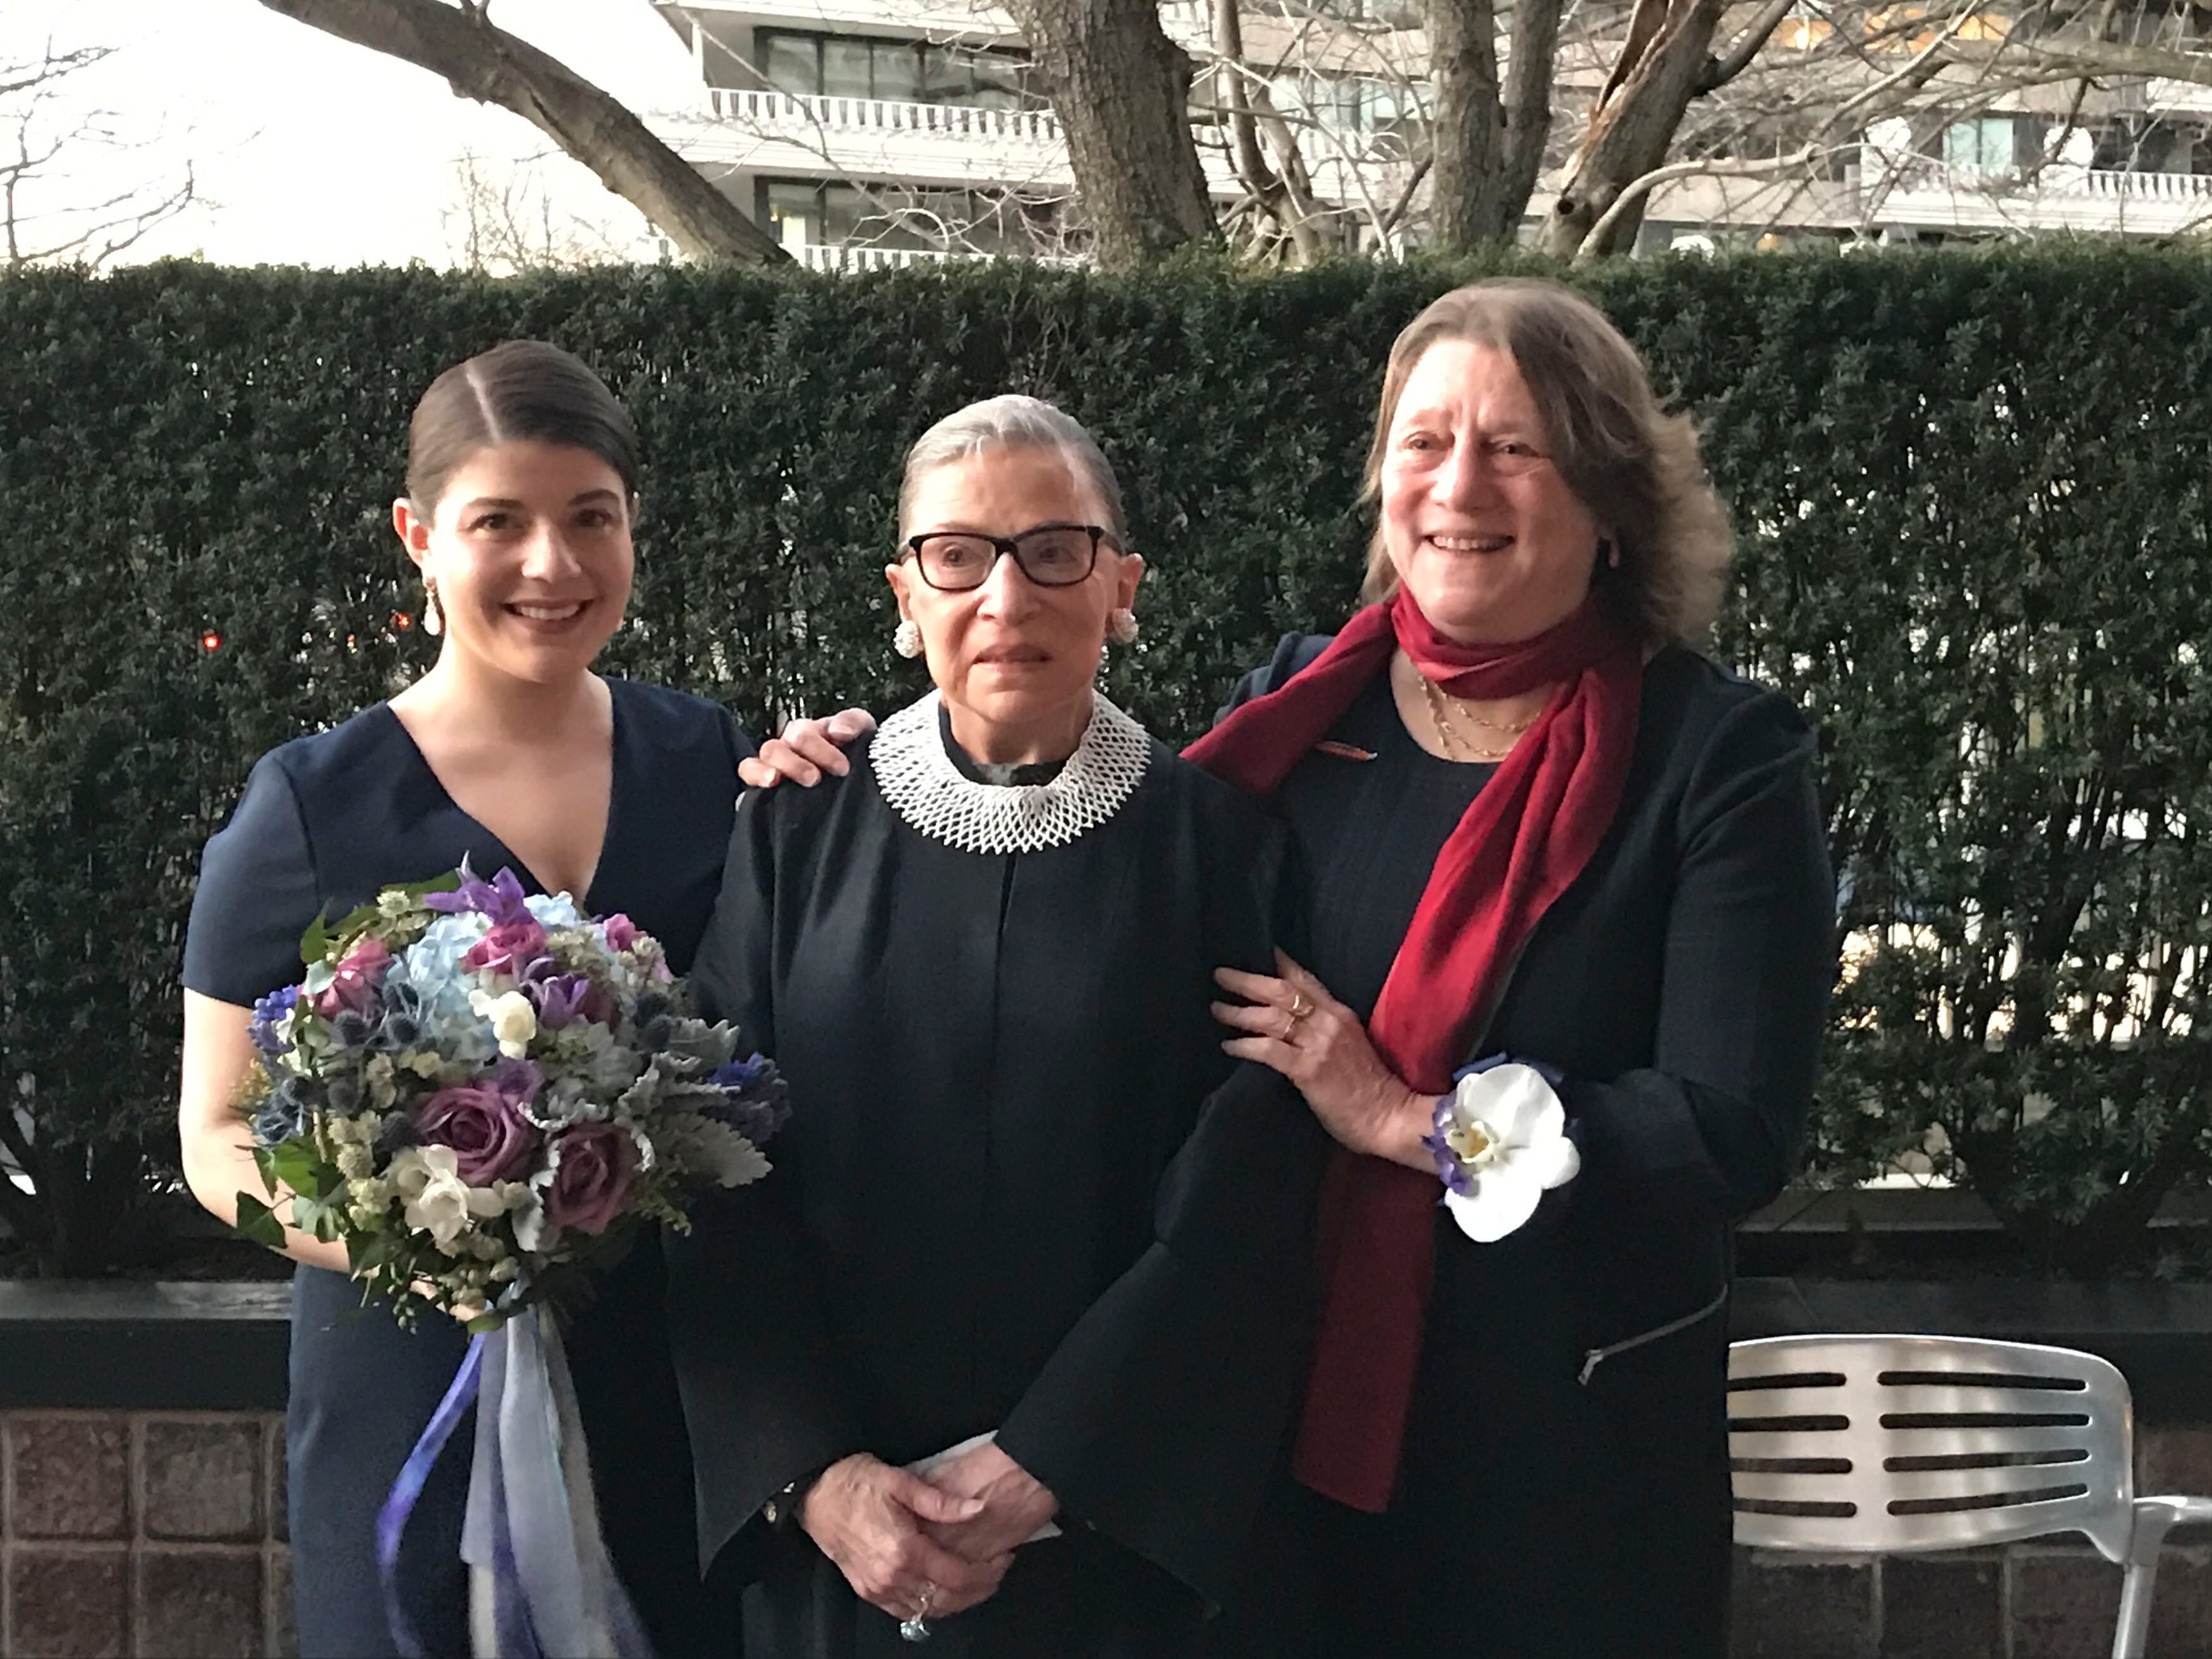 Three generations of women dedicated to the law: Jane C. Ginsburg, with her mother, Ruth Bader Ginsburg, and her daughter, Clara Spera, at the latter's wedding.